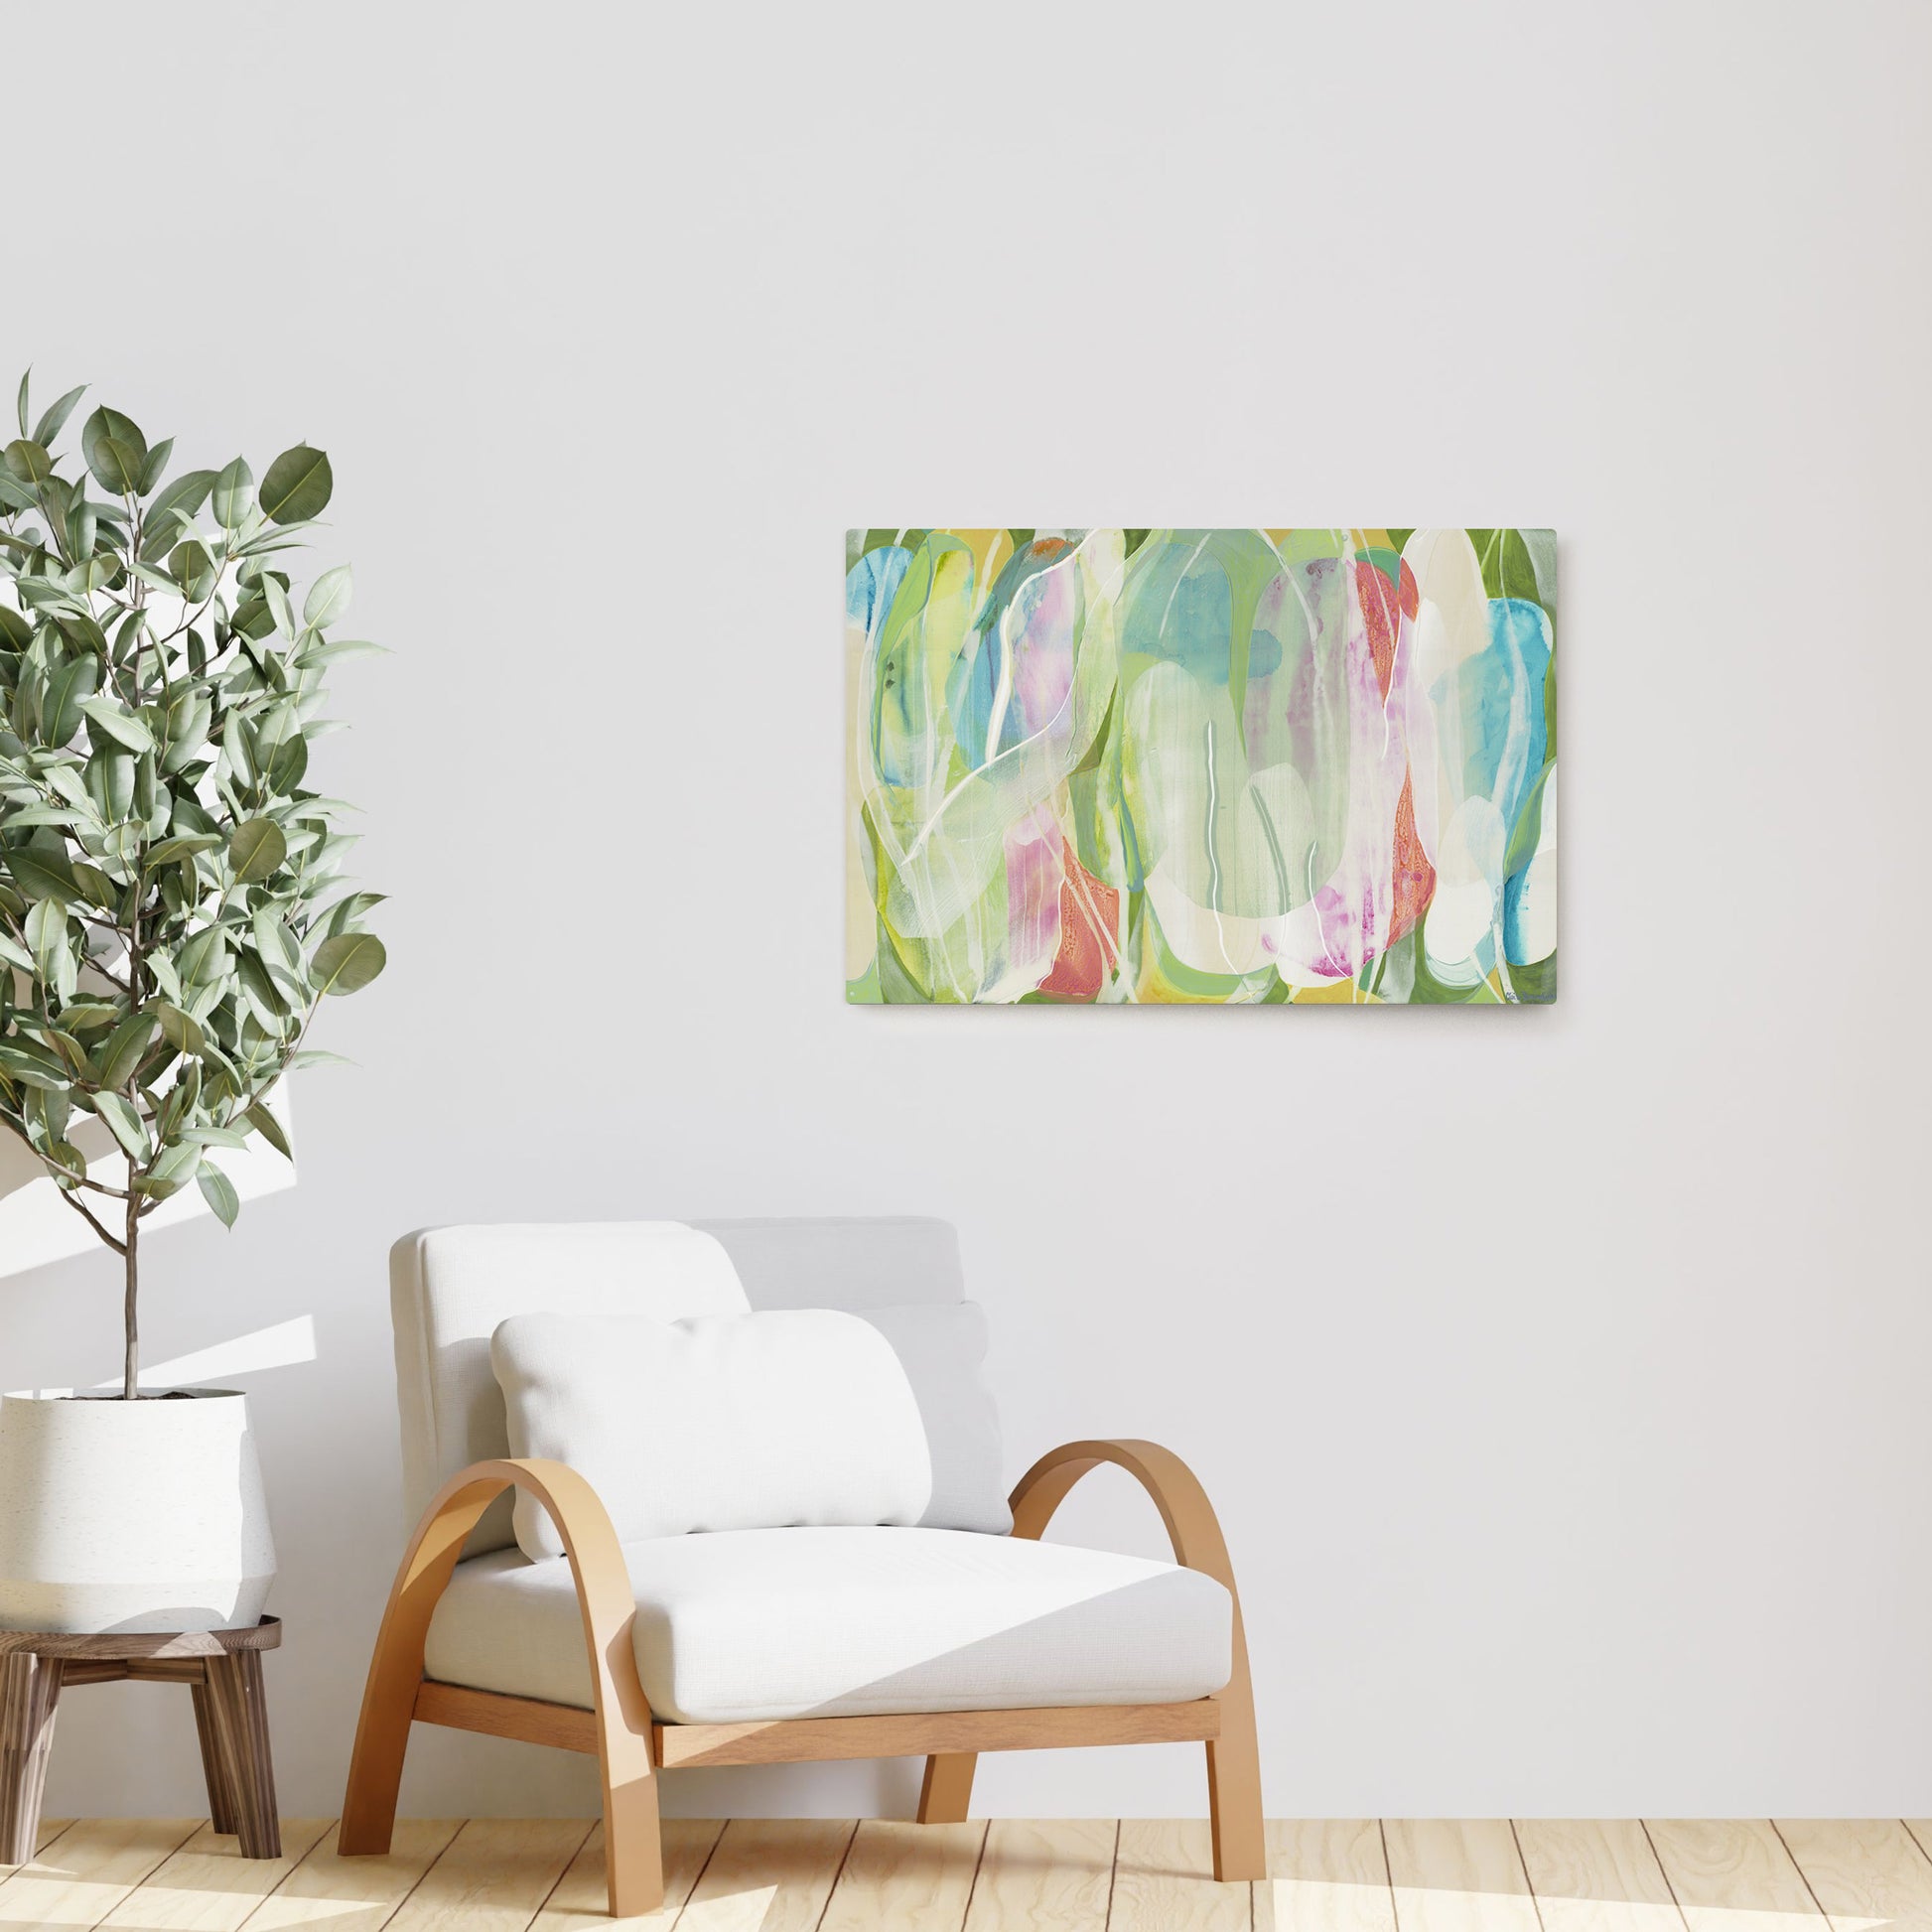 Claire Desjardins' Fresh Avocado painting reproduced on HD metal print and displayed on wall